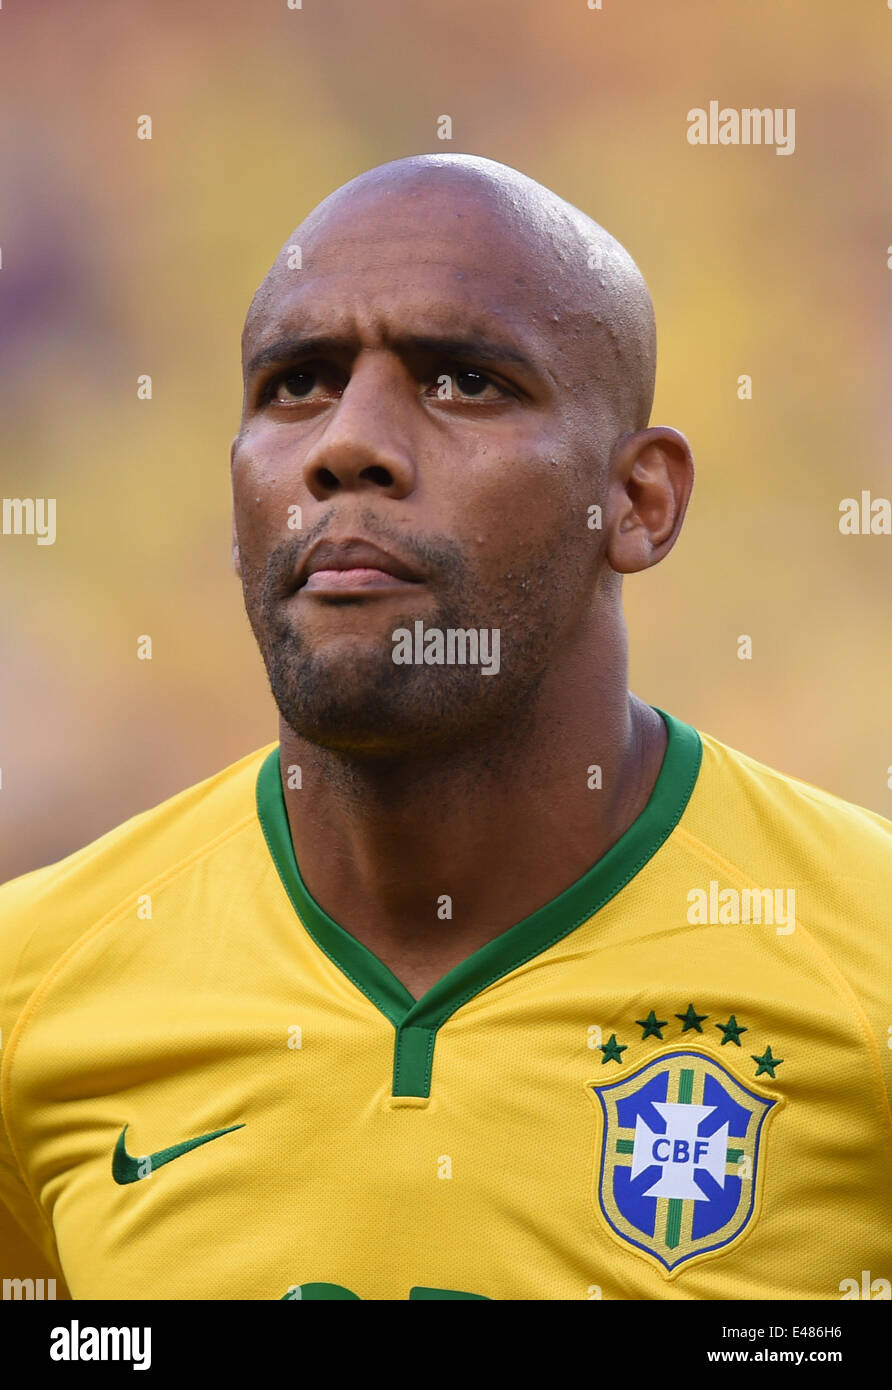 Fortaleza, Brazil. 04th July, 2014. Maicon of Brazil seen during the FIFA World Cup 2014 quarter final match soccer between Brazil and Colombia at the Estadio Castelao in Fortaleza, Brazil, 04 July 2014. Photo: Marius Becker/dpa/Alamy Live News Stock Photo